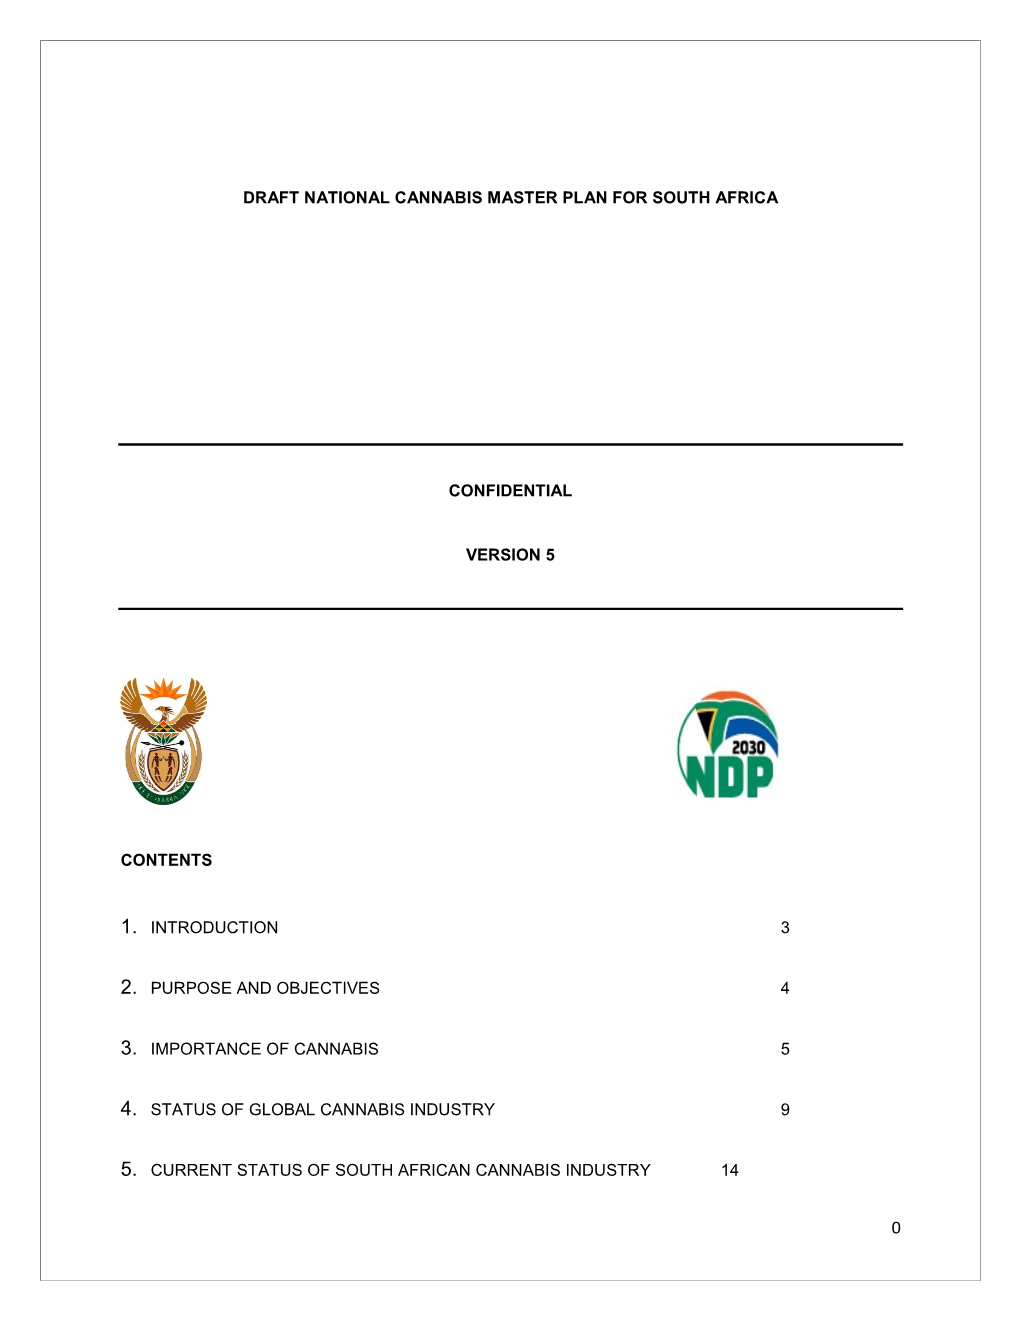 Draft National Cannabis Master Plan for South Africa